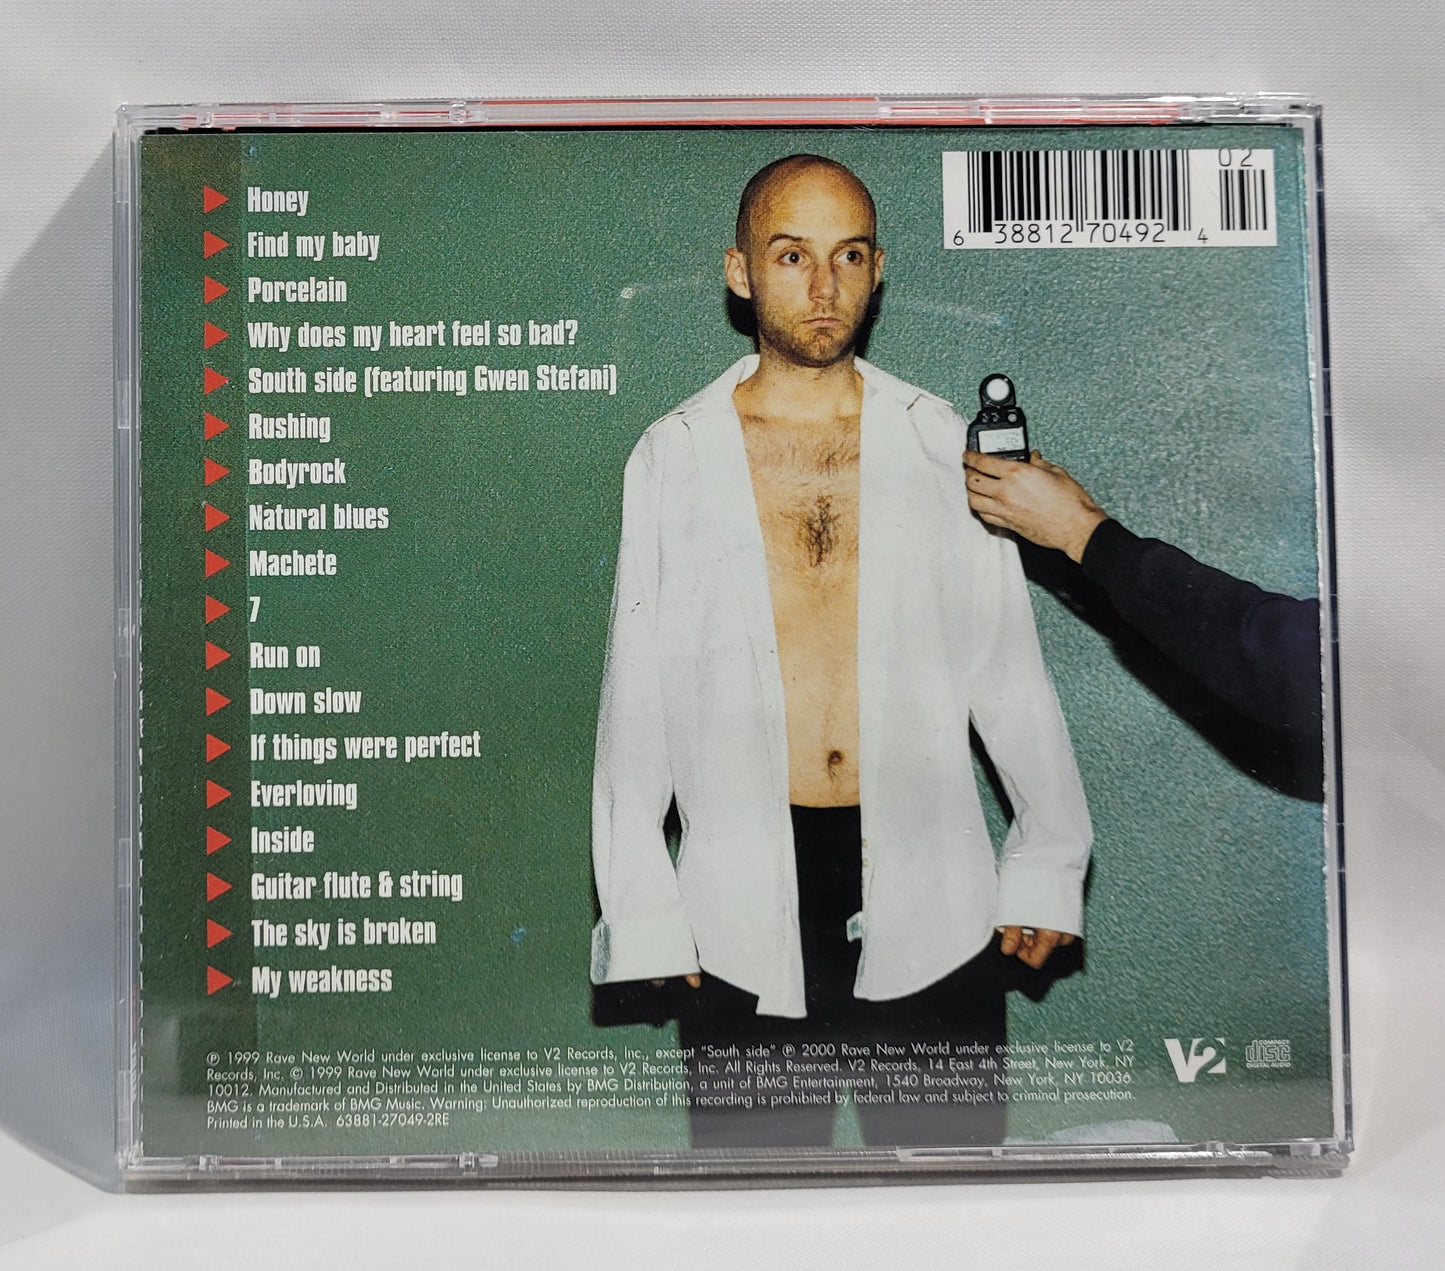 Moby - Play [CD]